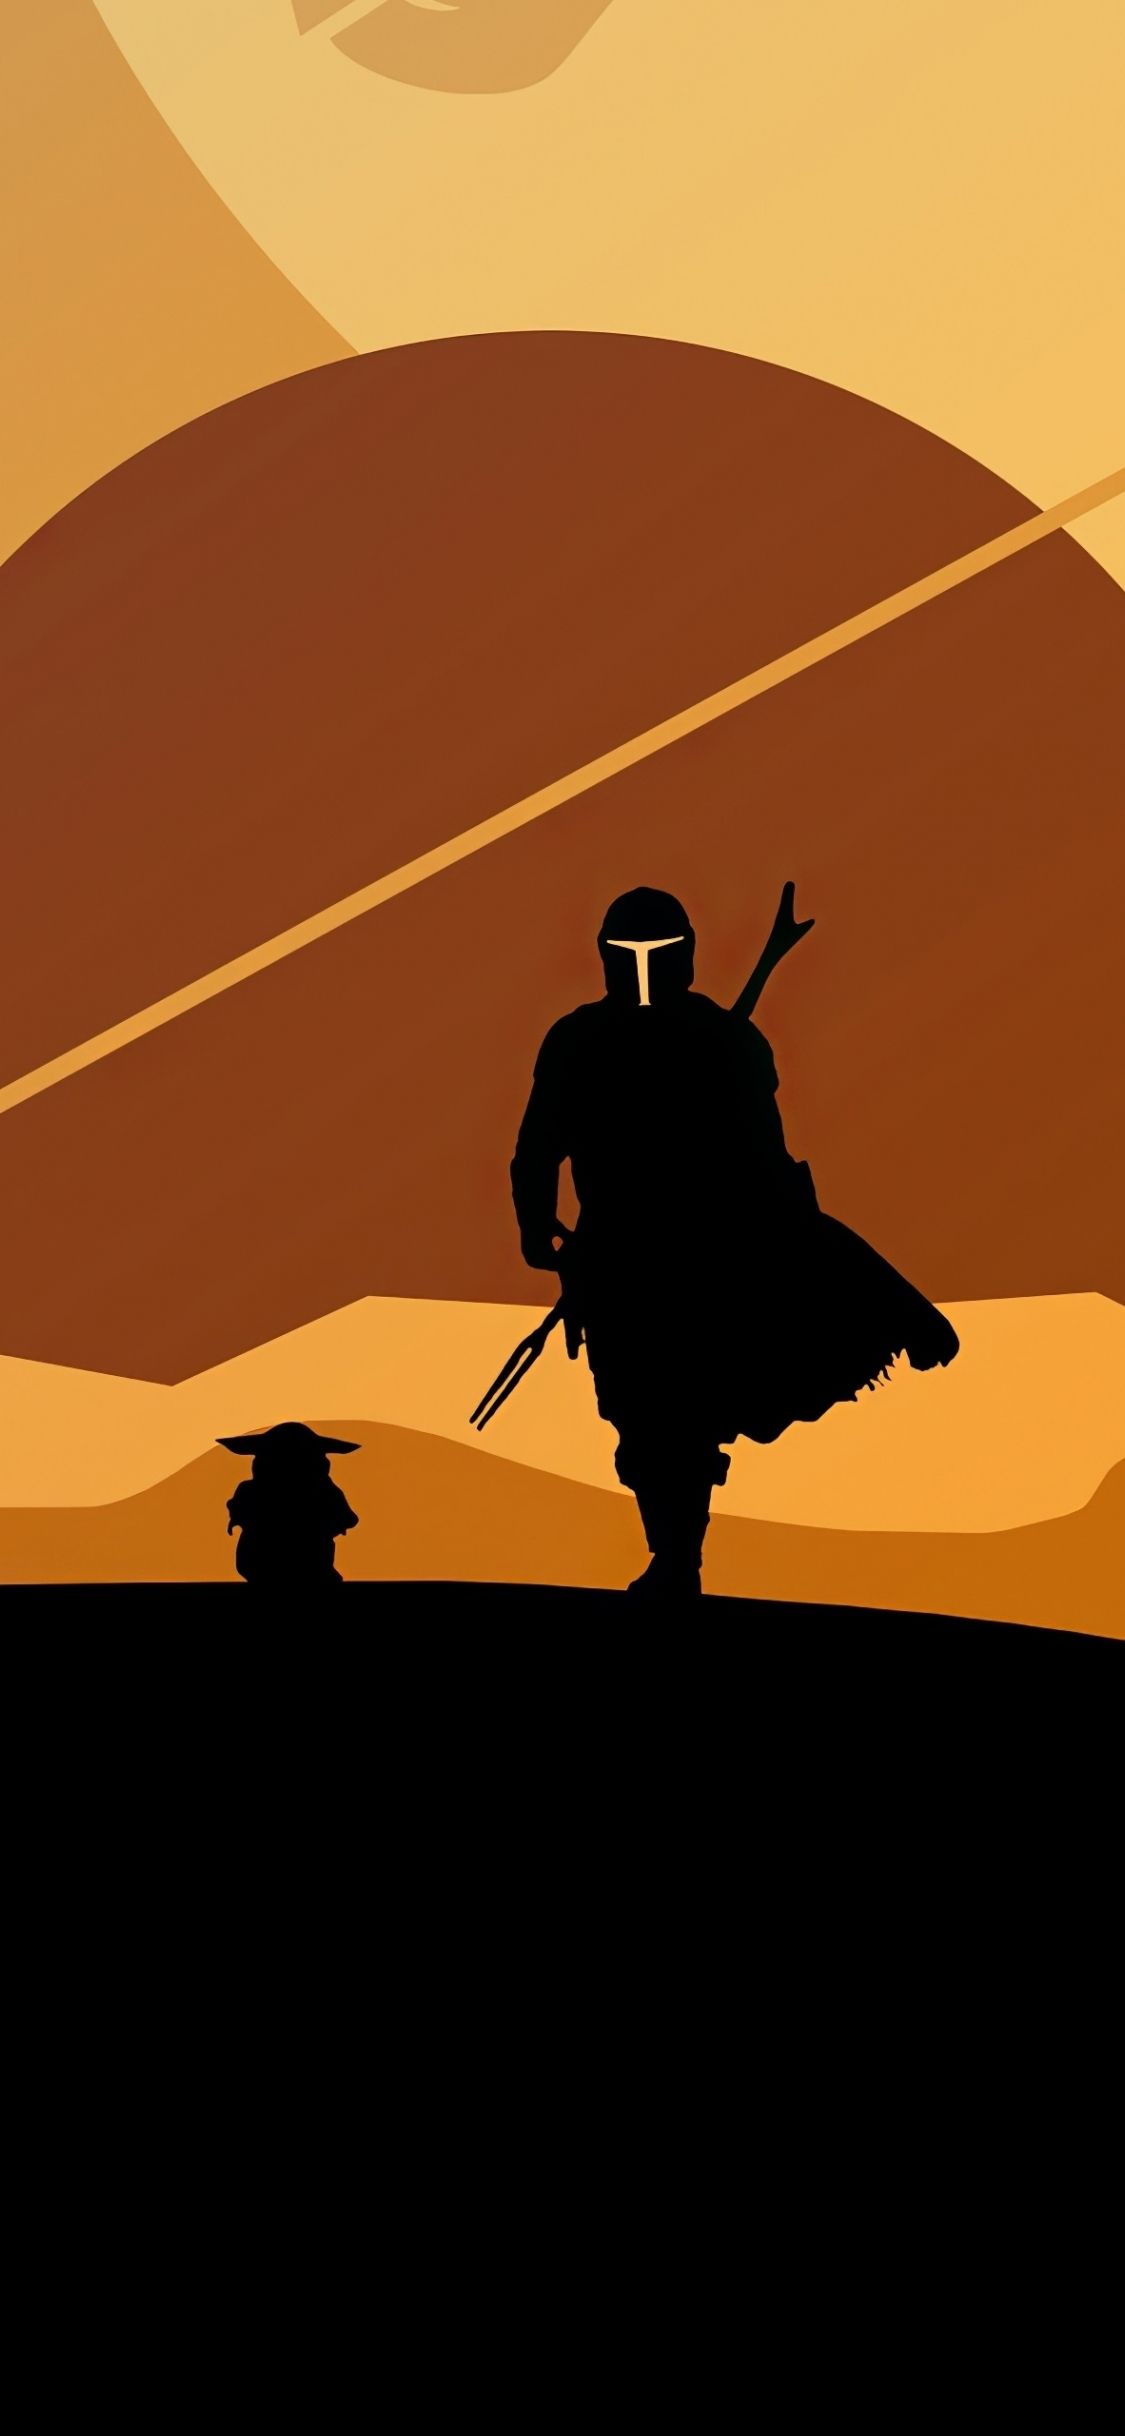 Download 1125x2436 wallpapers 2020, the mandalorian and yoda, minimal, silhouette, artwork, iphone x 1125x2436 hd image, background, 24513